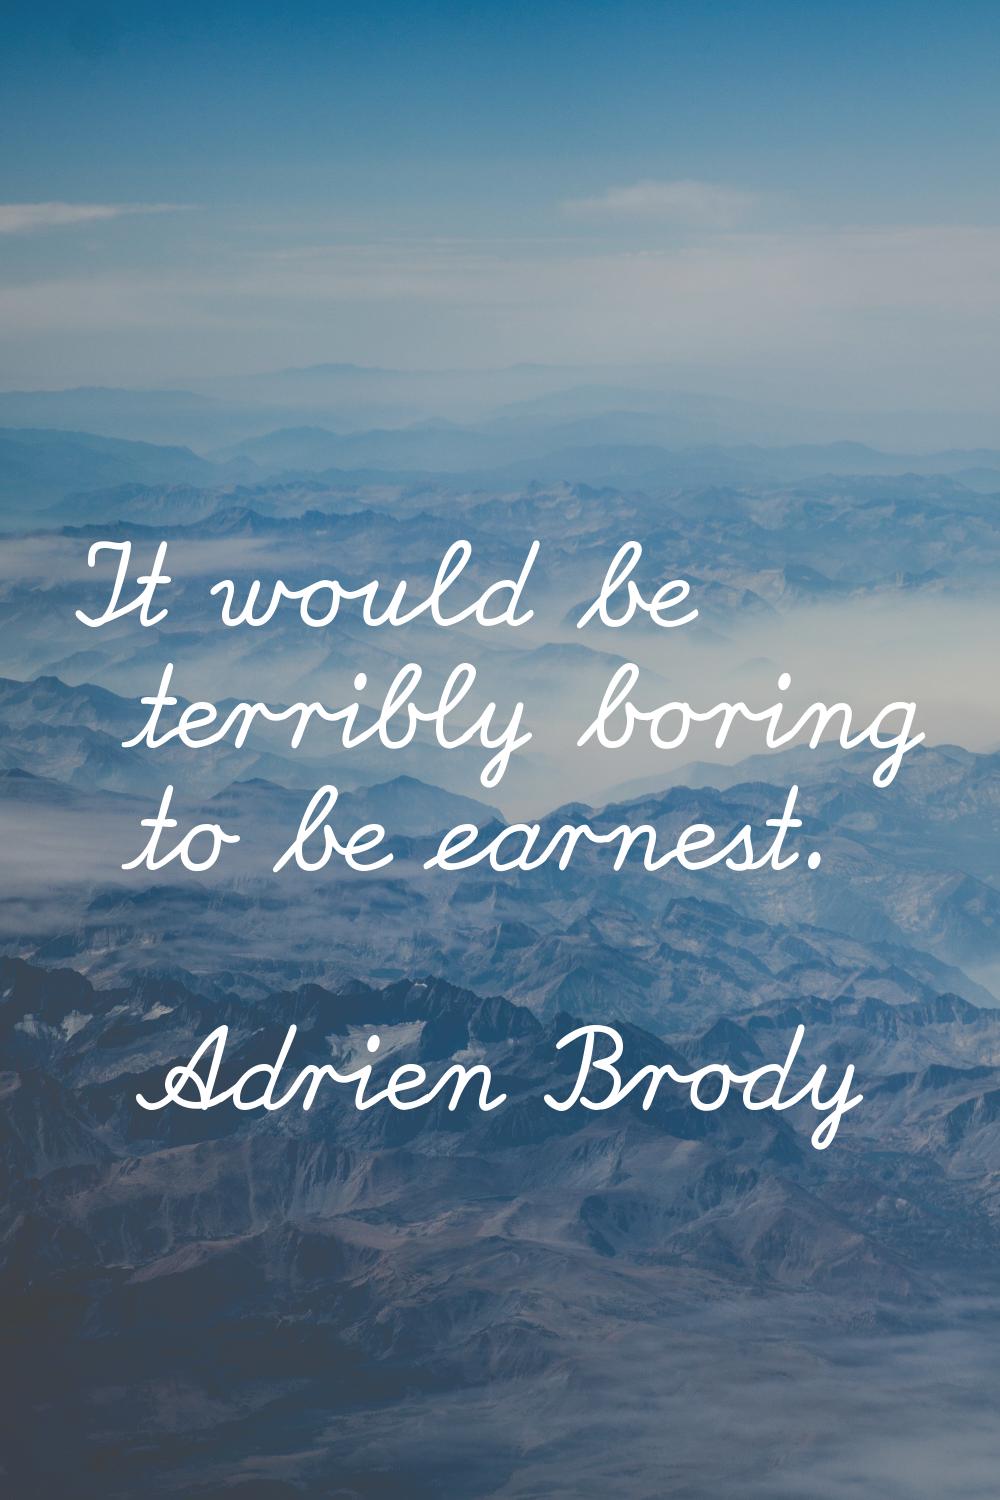 It would be terribly boring to be earnest.